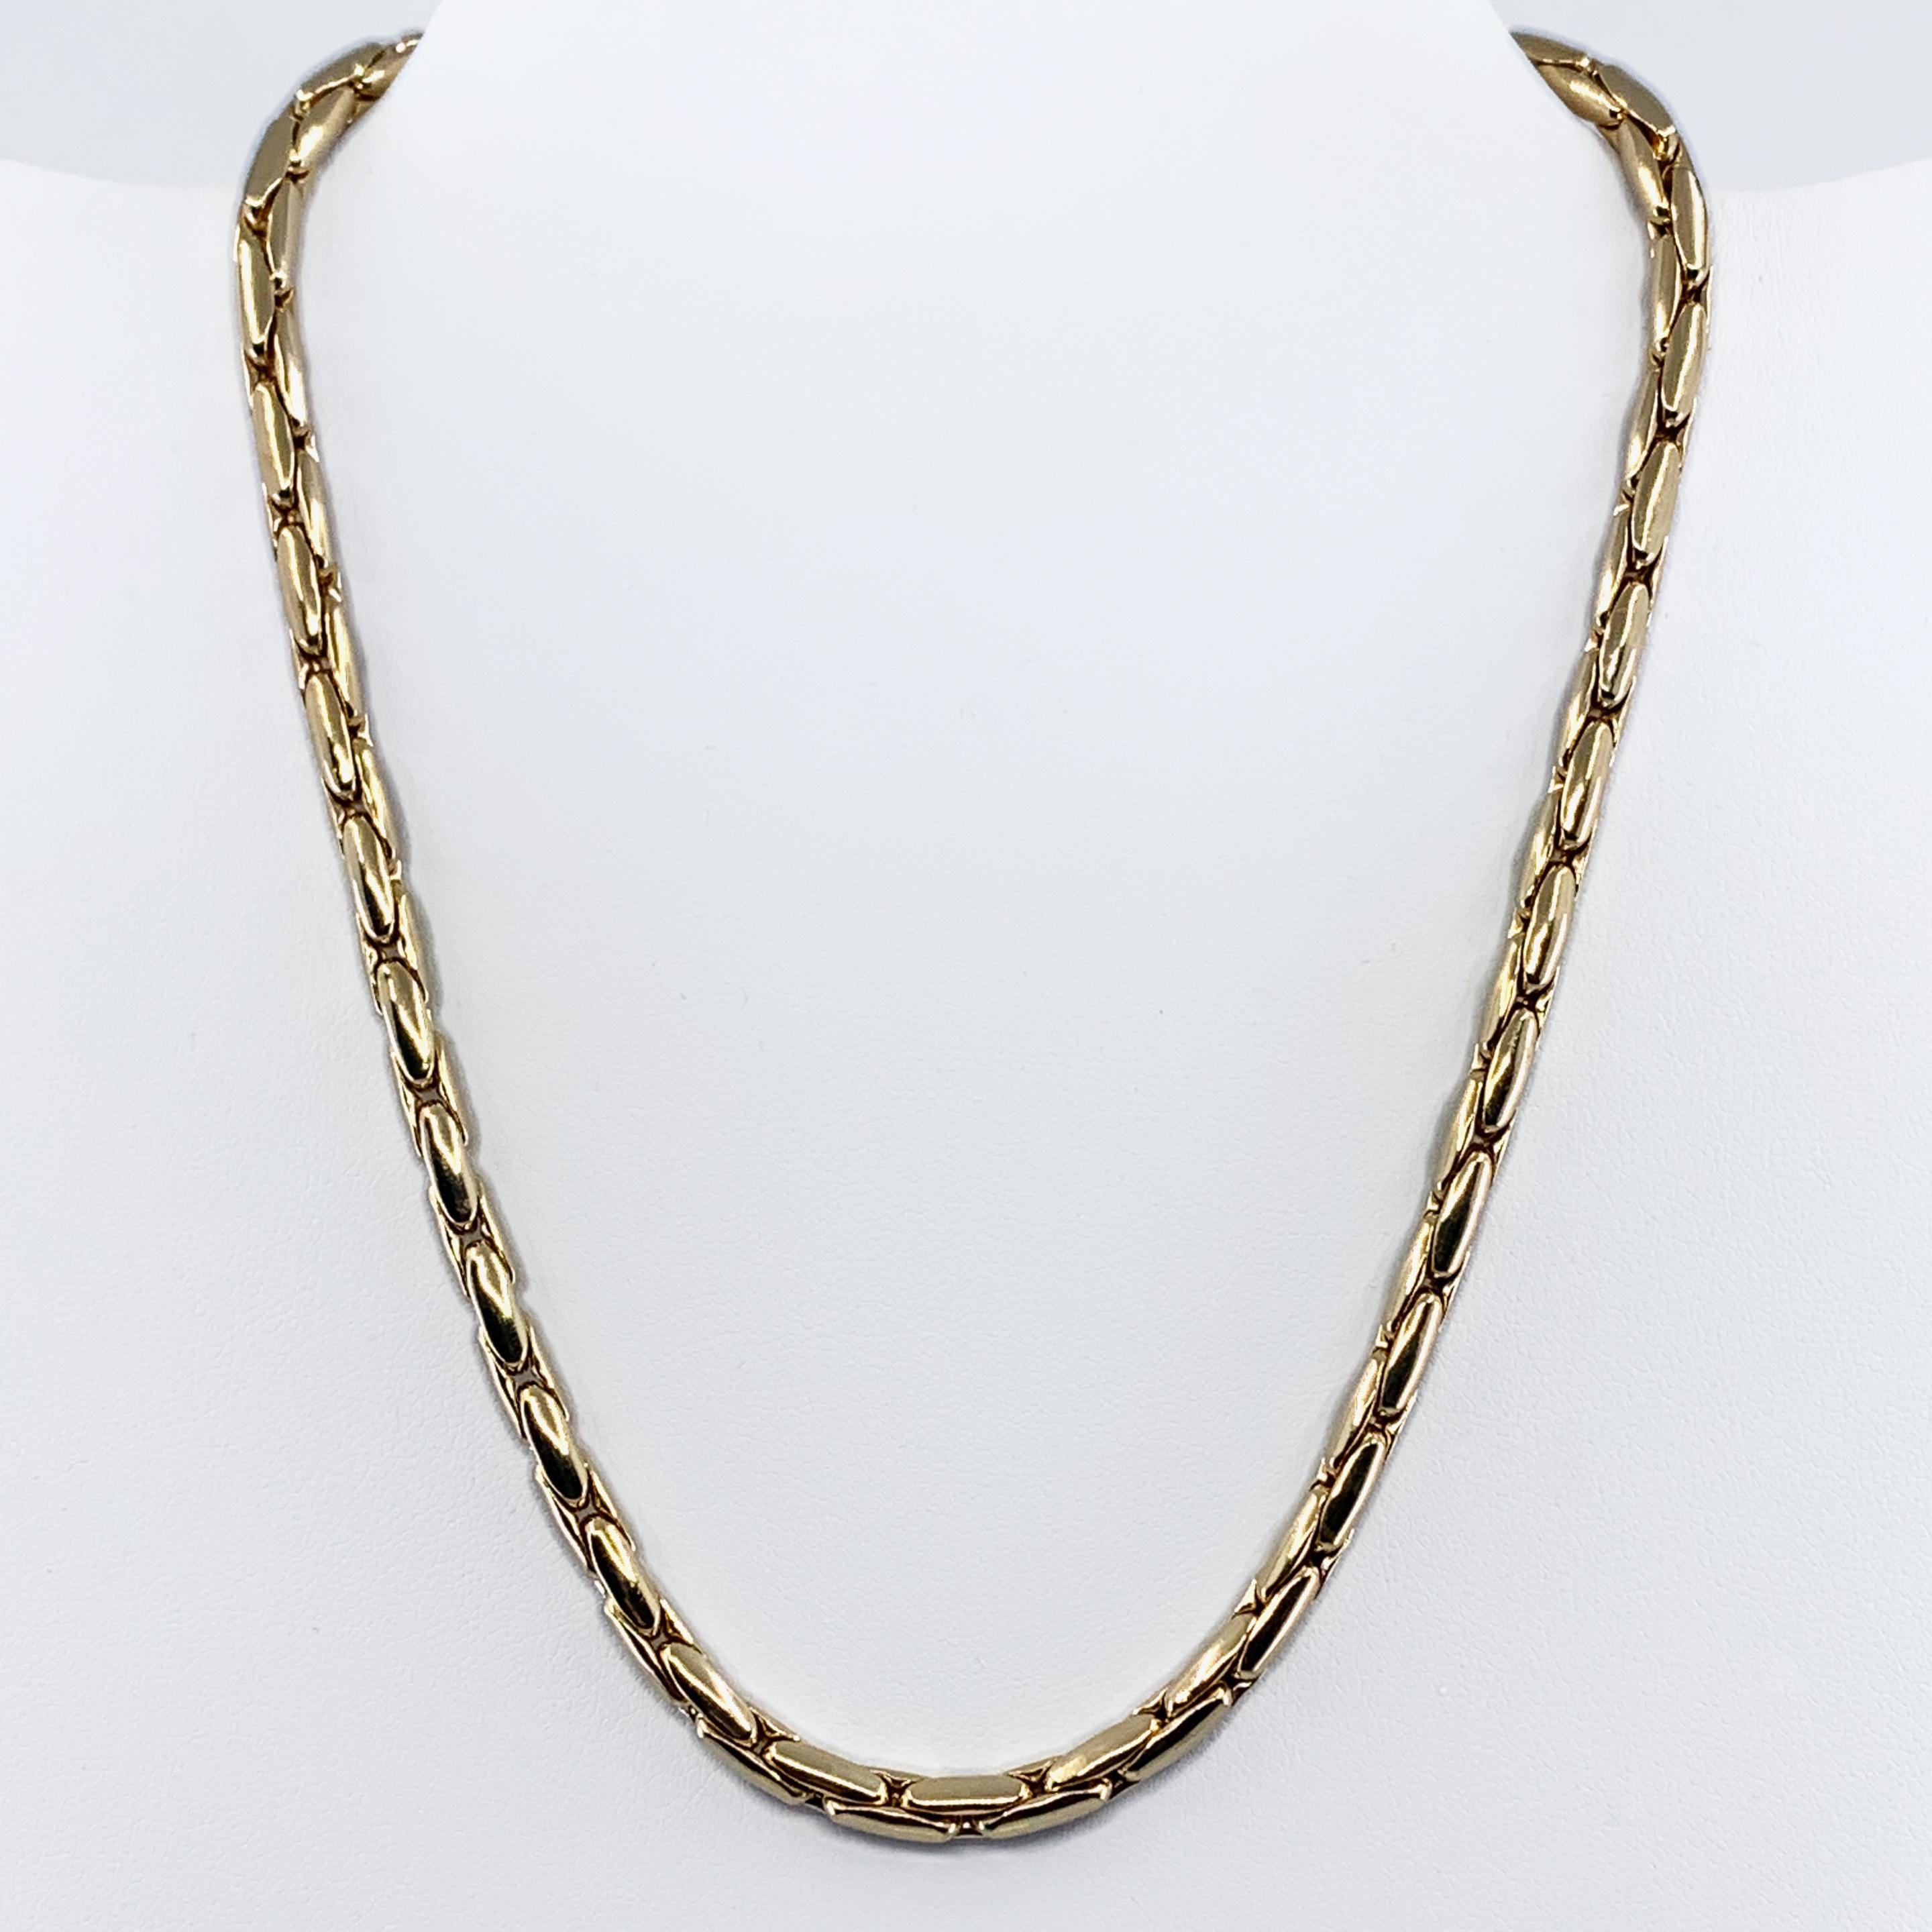 This is a fantastic, versatile chain, very sleek and very cool construction.  Boston link chains are hollow on the inside, by design, so they're a great way to create a thick gold line -- one with a cool pattern of intersecting oval links -- that is